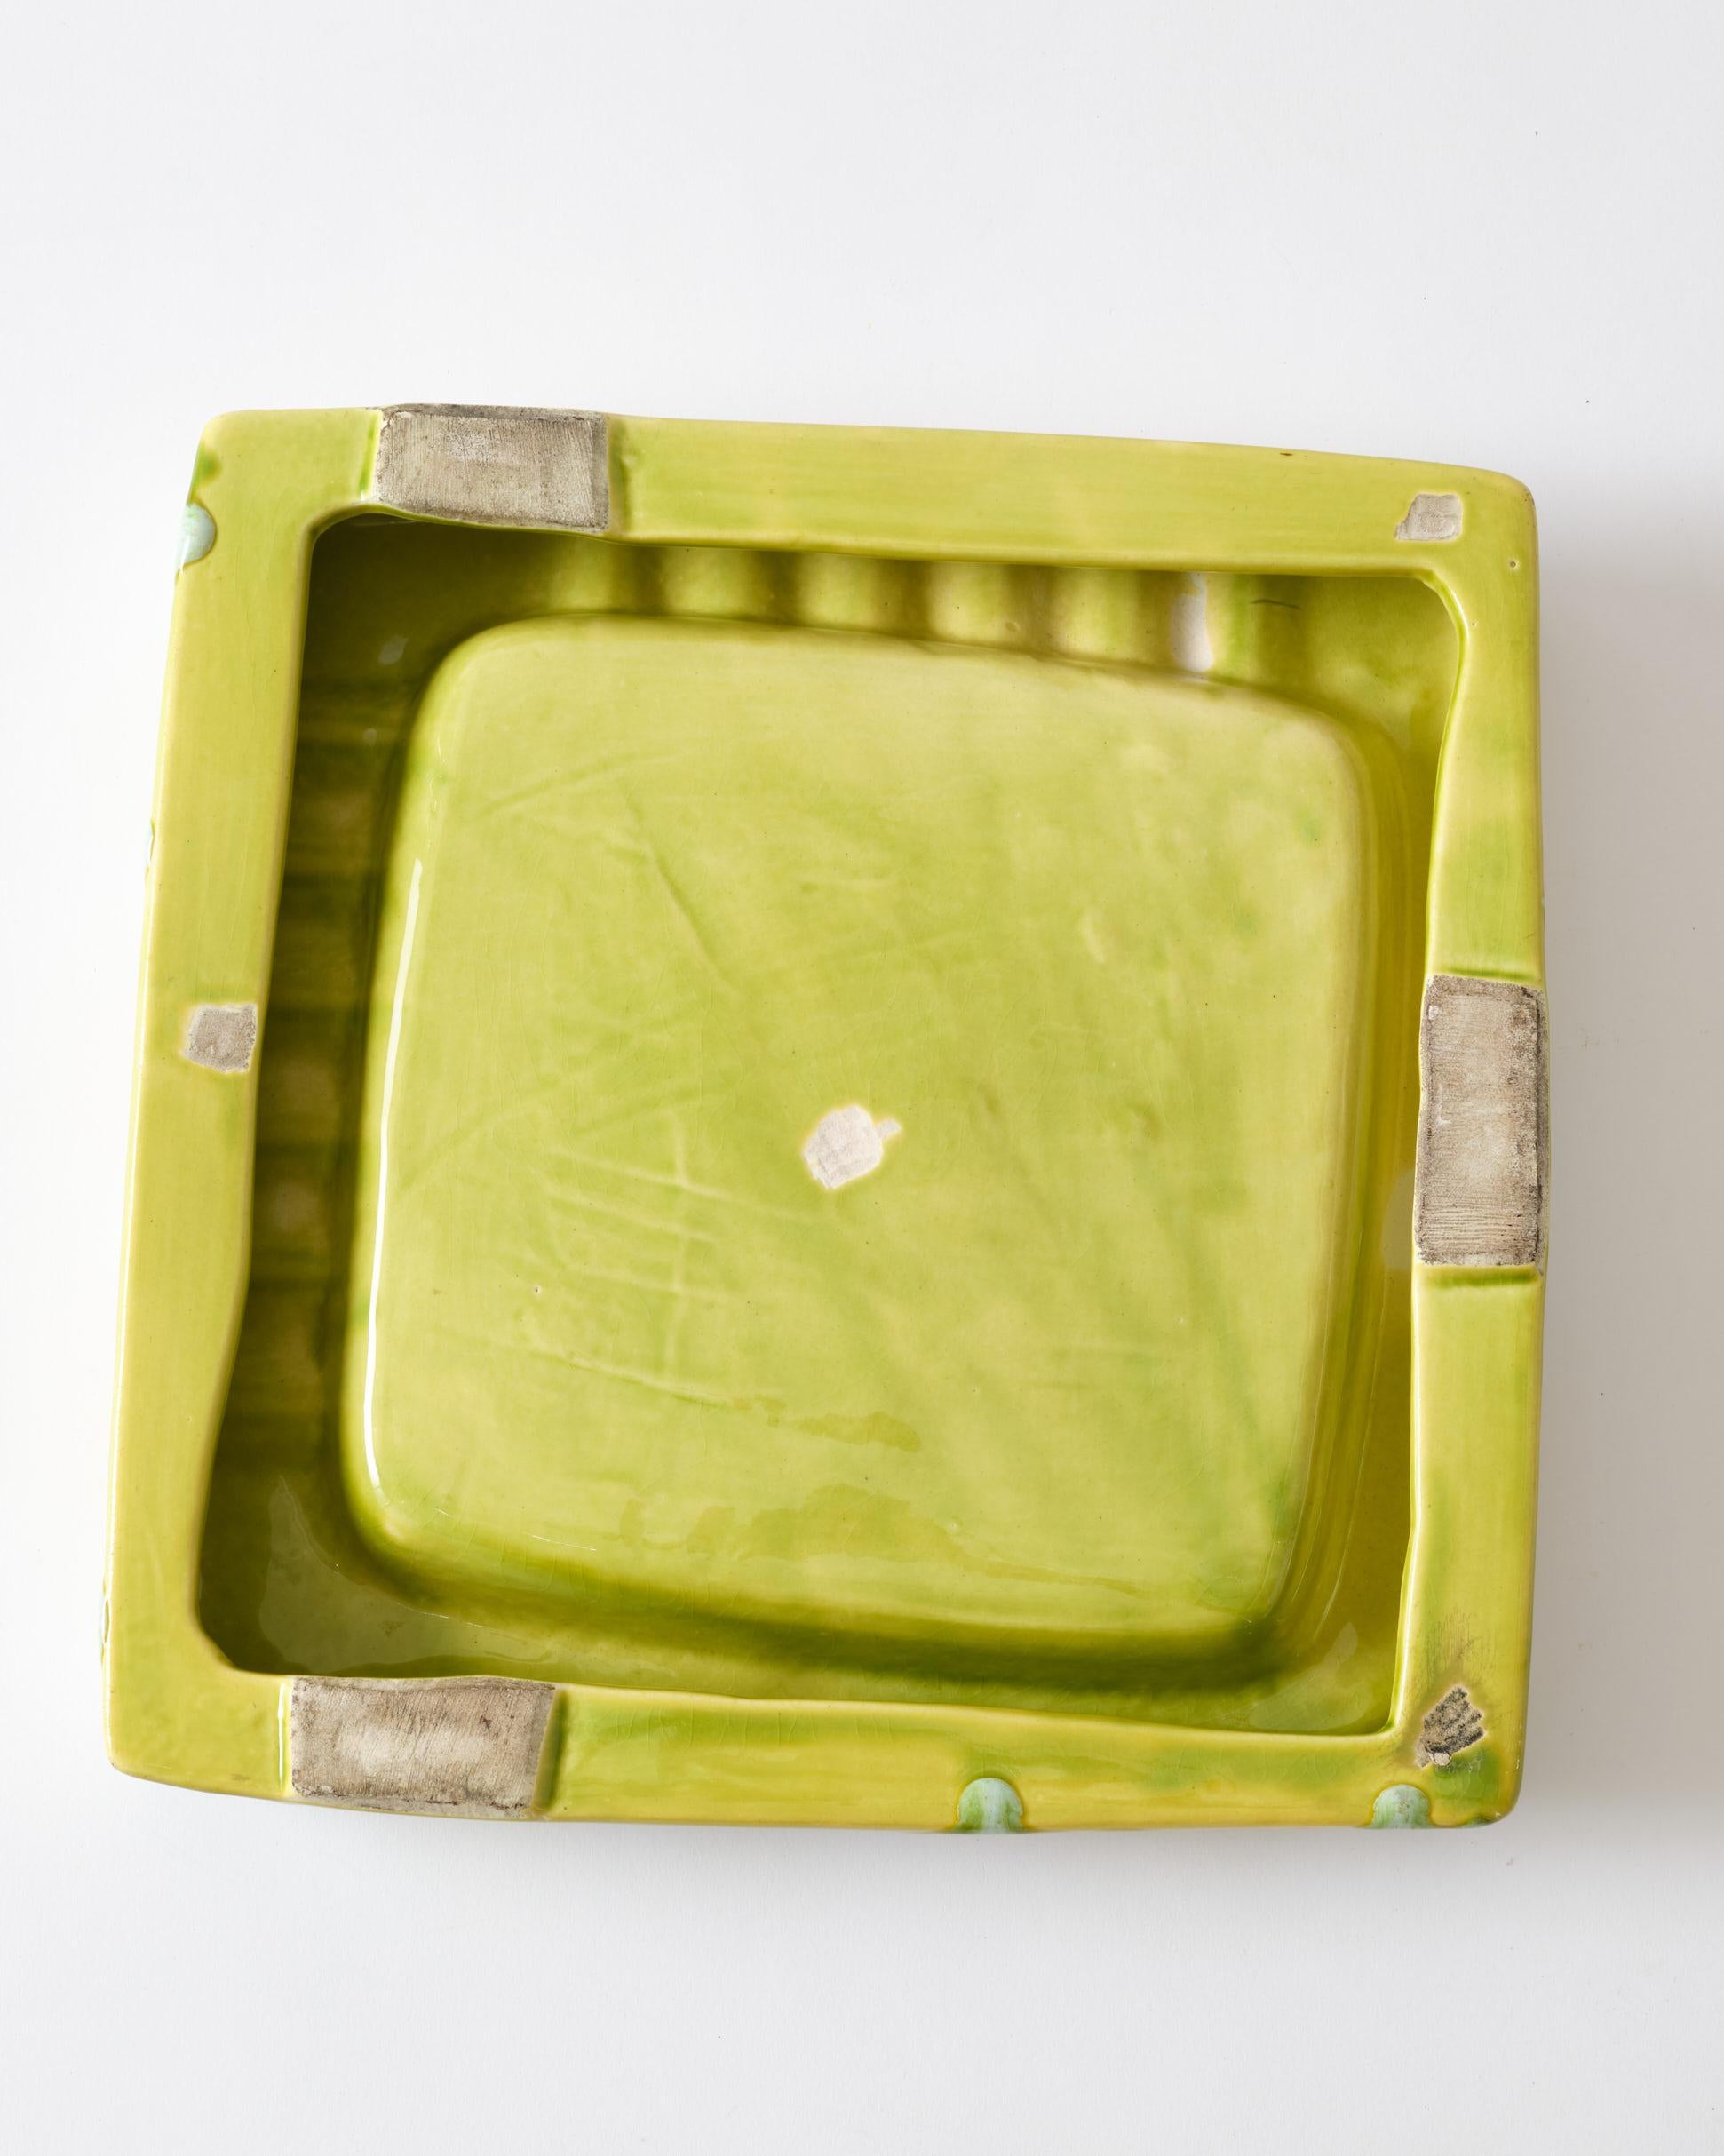 Mid-20th Century Ceramic Ashtray, Lime Green With White Details, Italy, C 1950, Vintage Ashtray For Sale